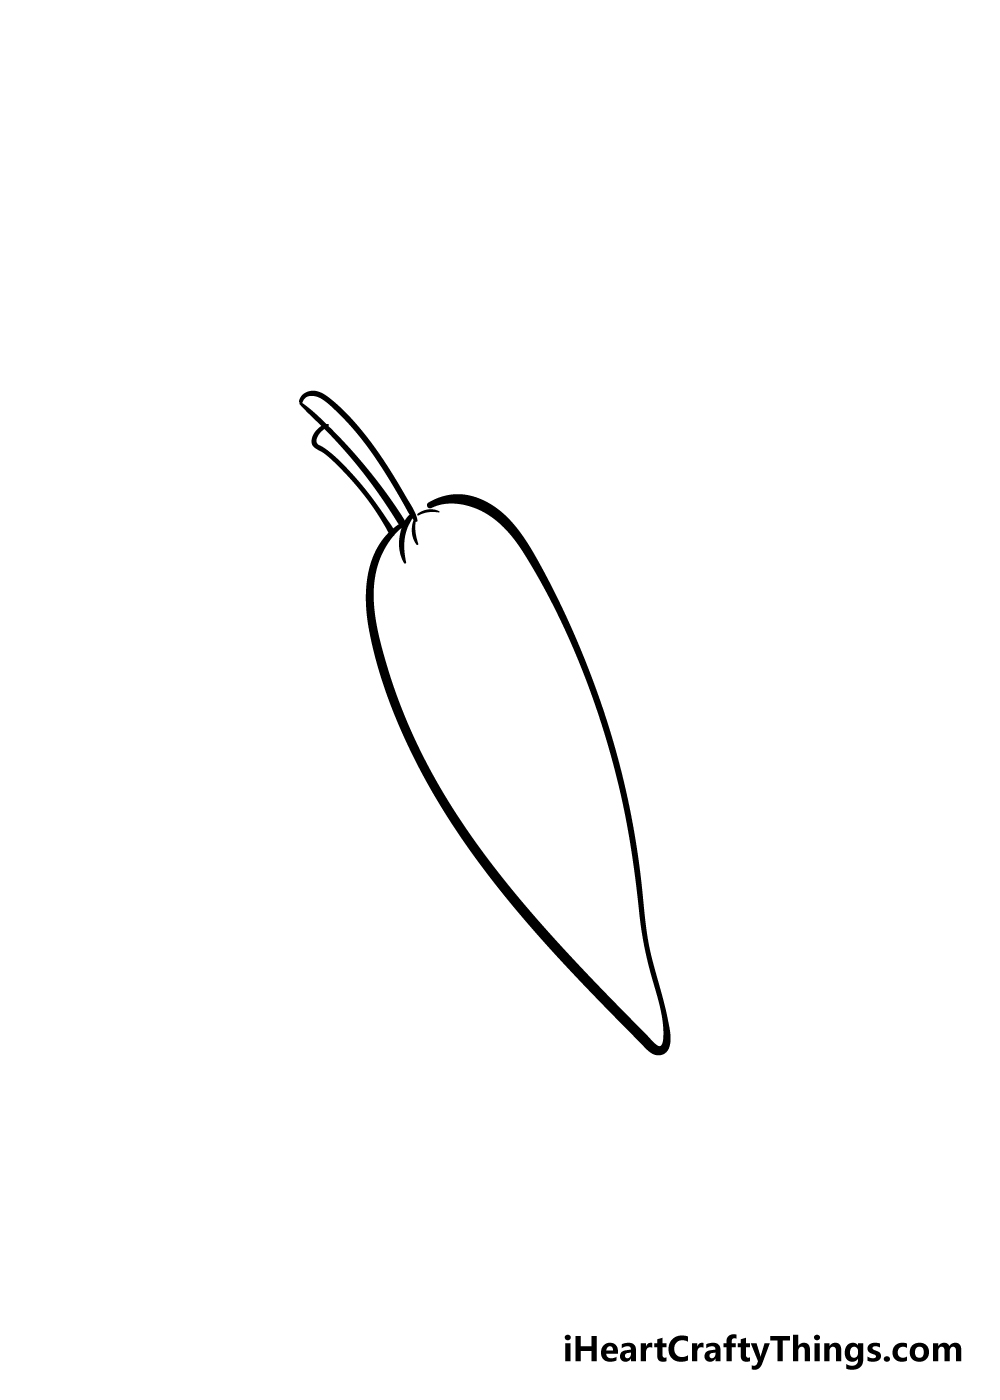 Carrot Drawing - How To Draw A Carrot Step By Step